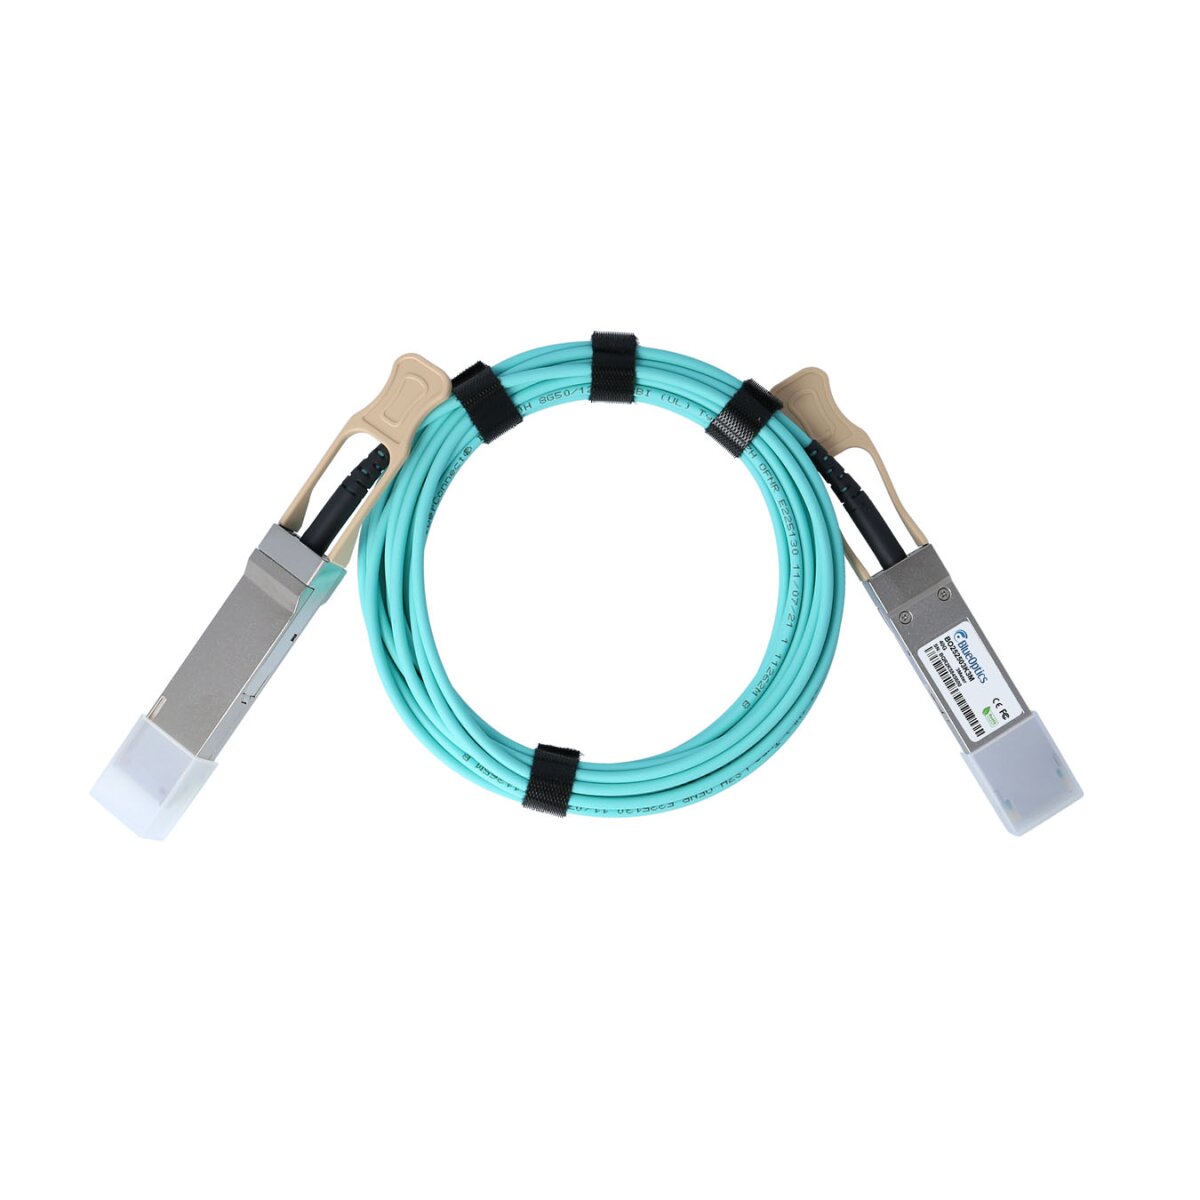 Cheap cables & adapters in online shop IT the OCTO AG